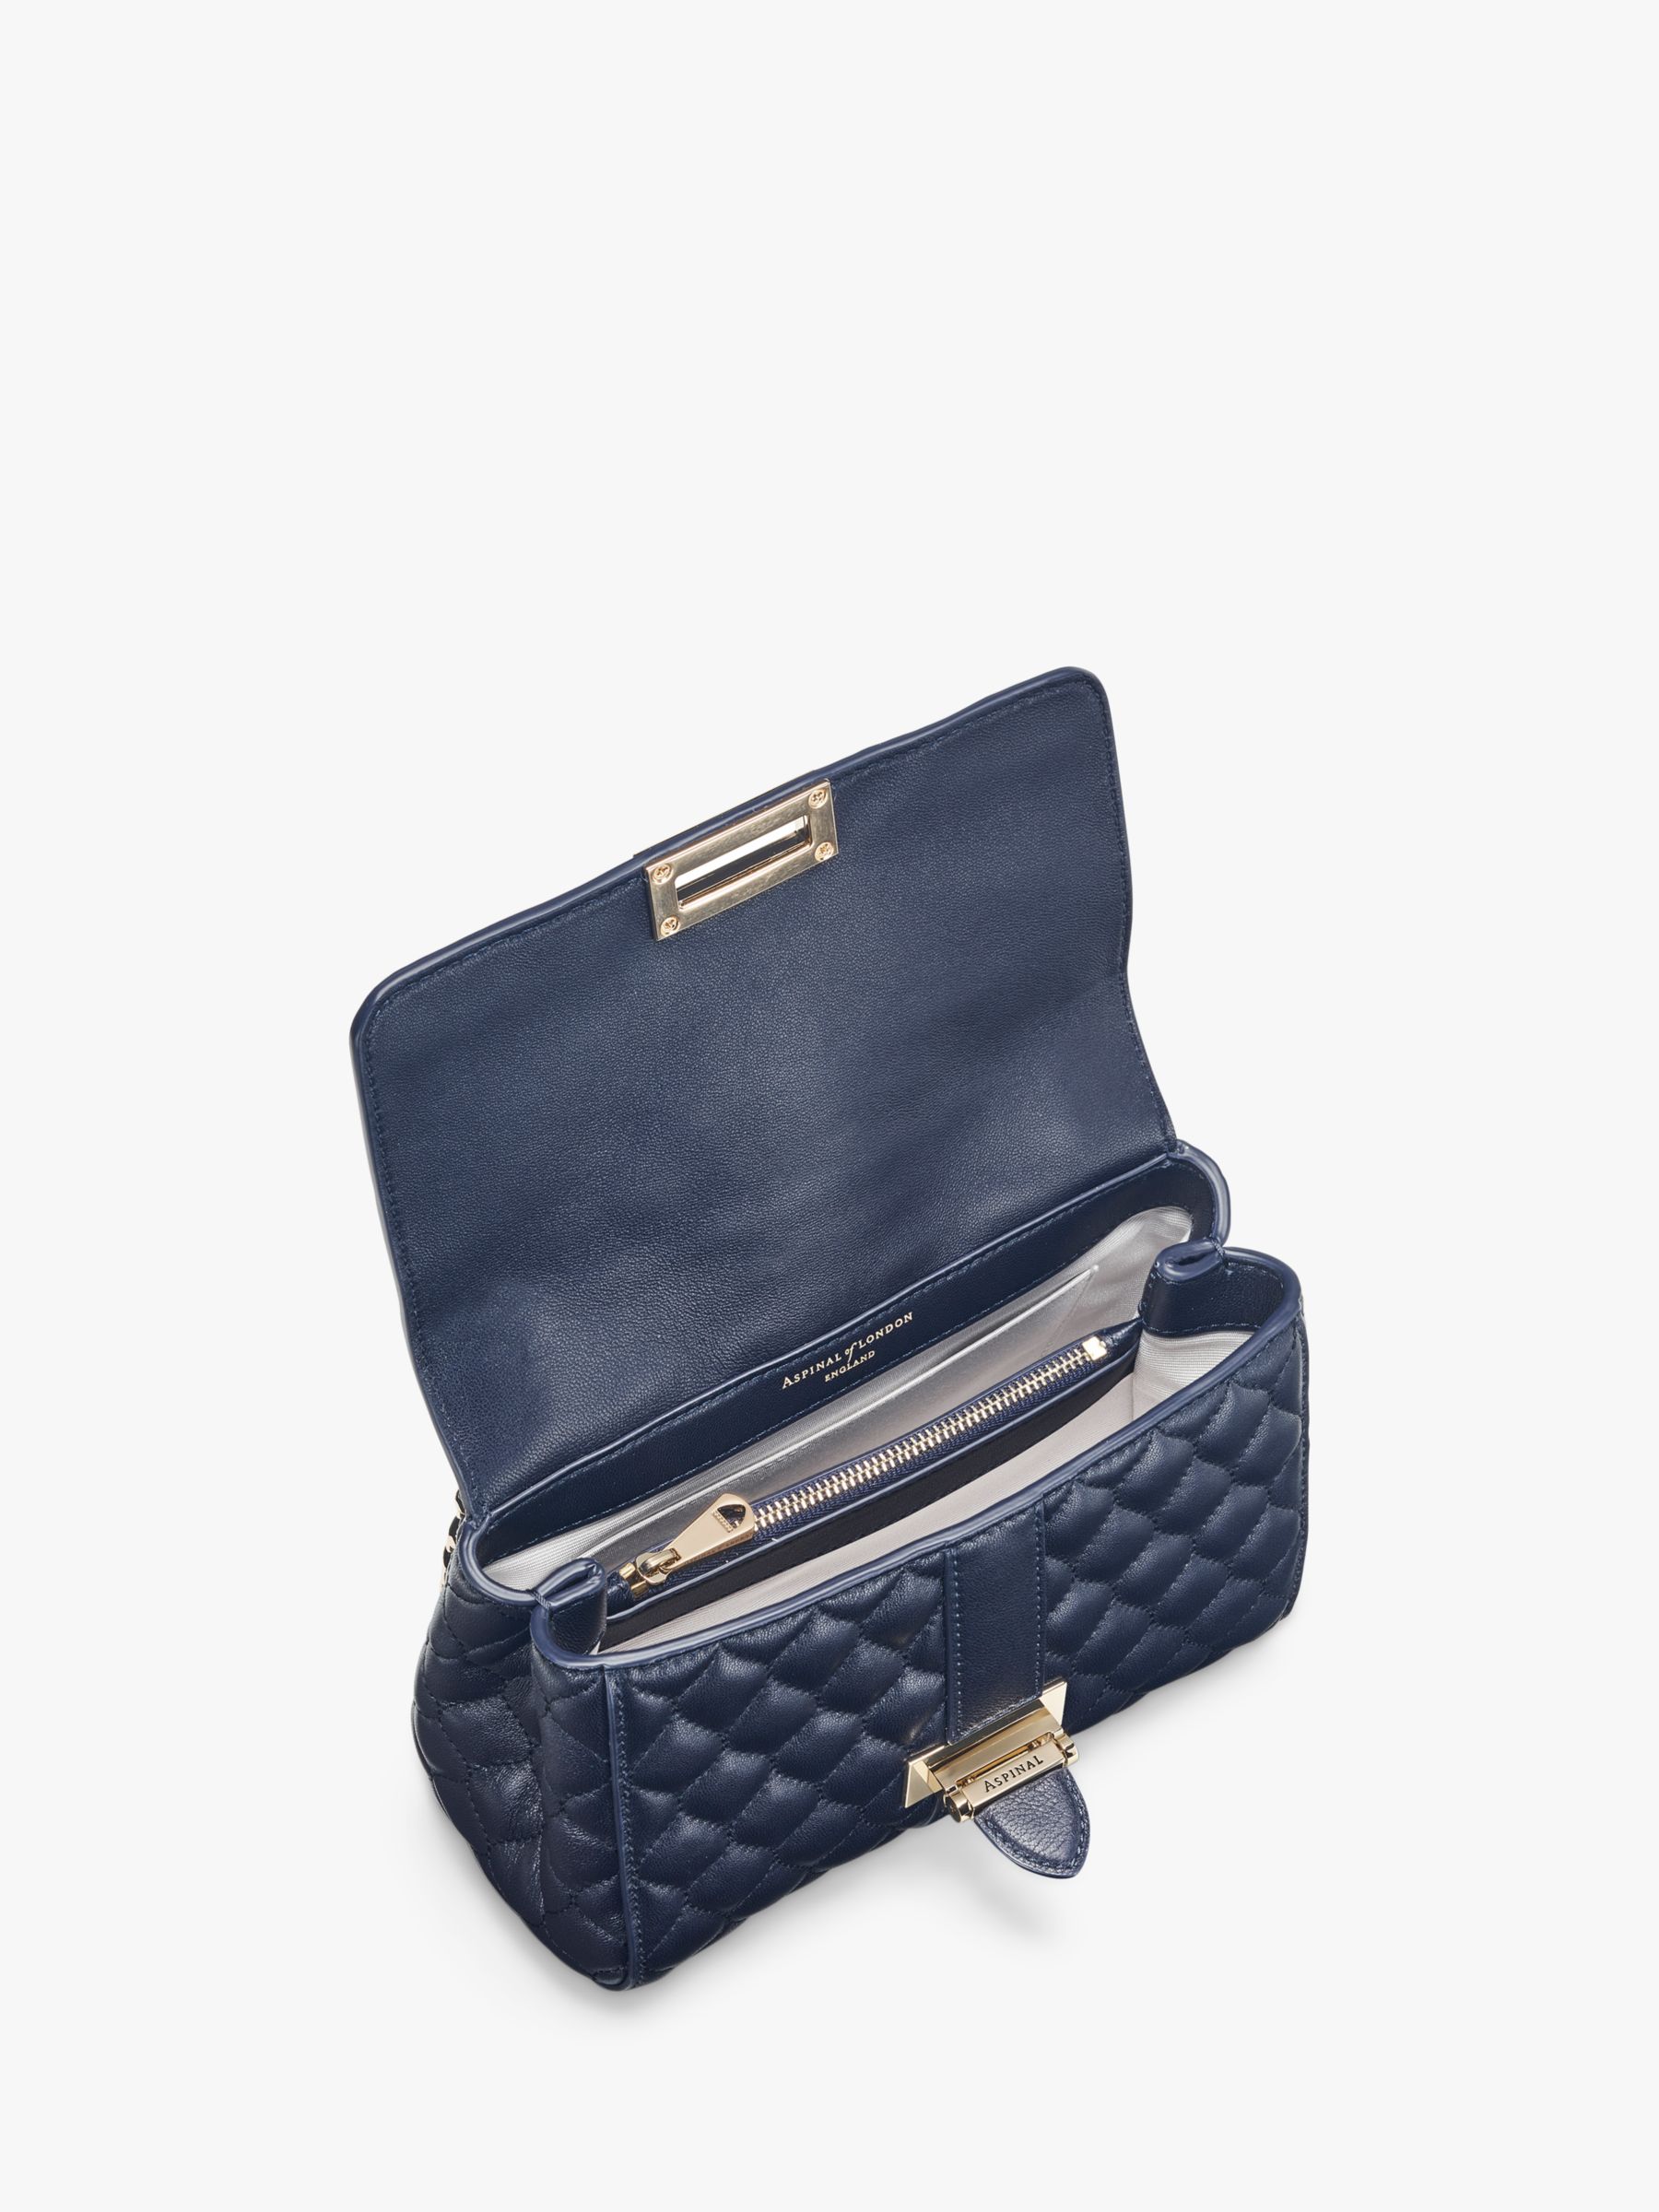 Buy Aspinal of London Lottie Small Smooth Quilted Leather Shoulder Bag Online at johnlewis.com